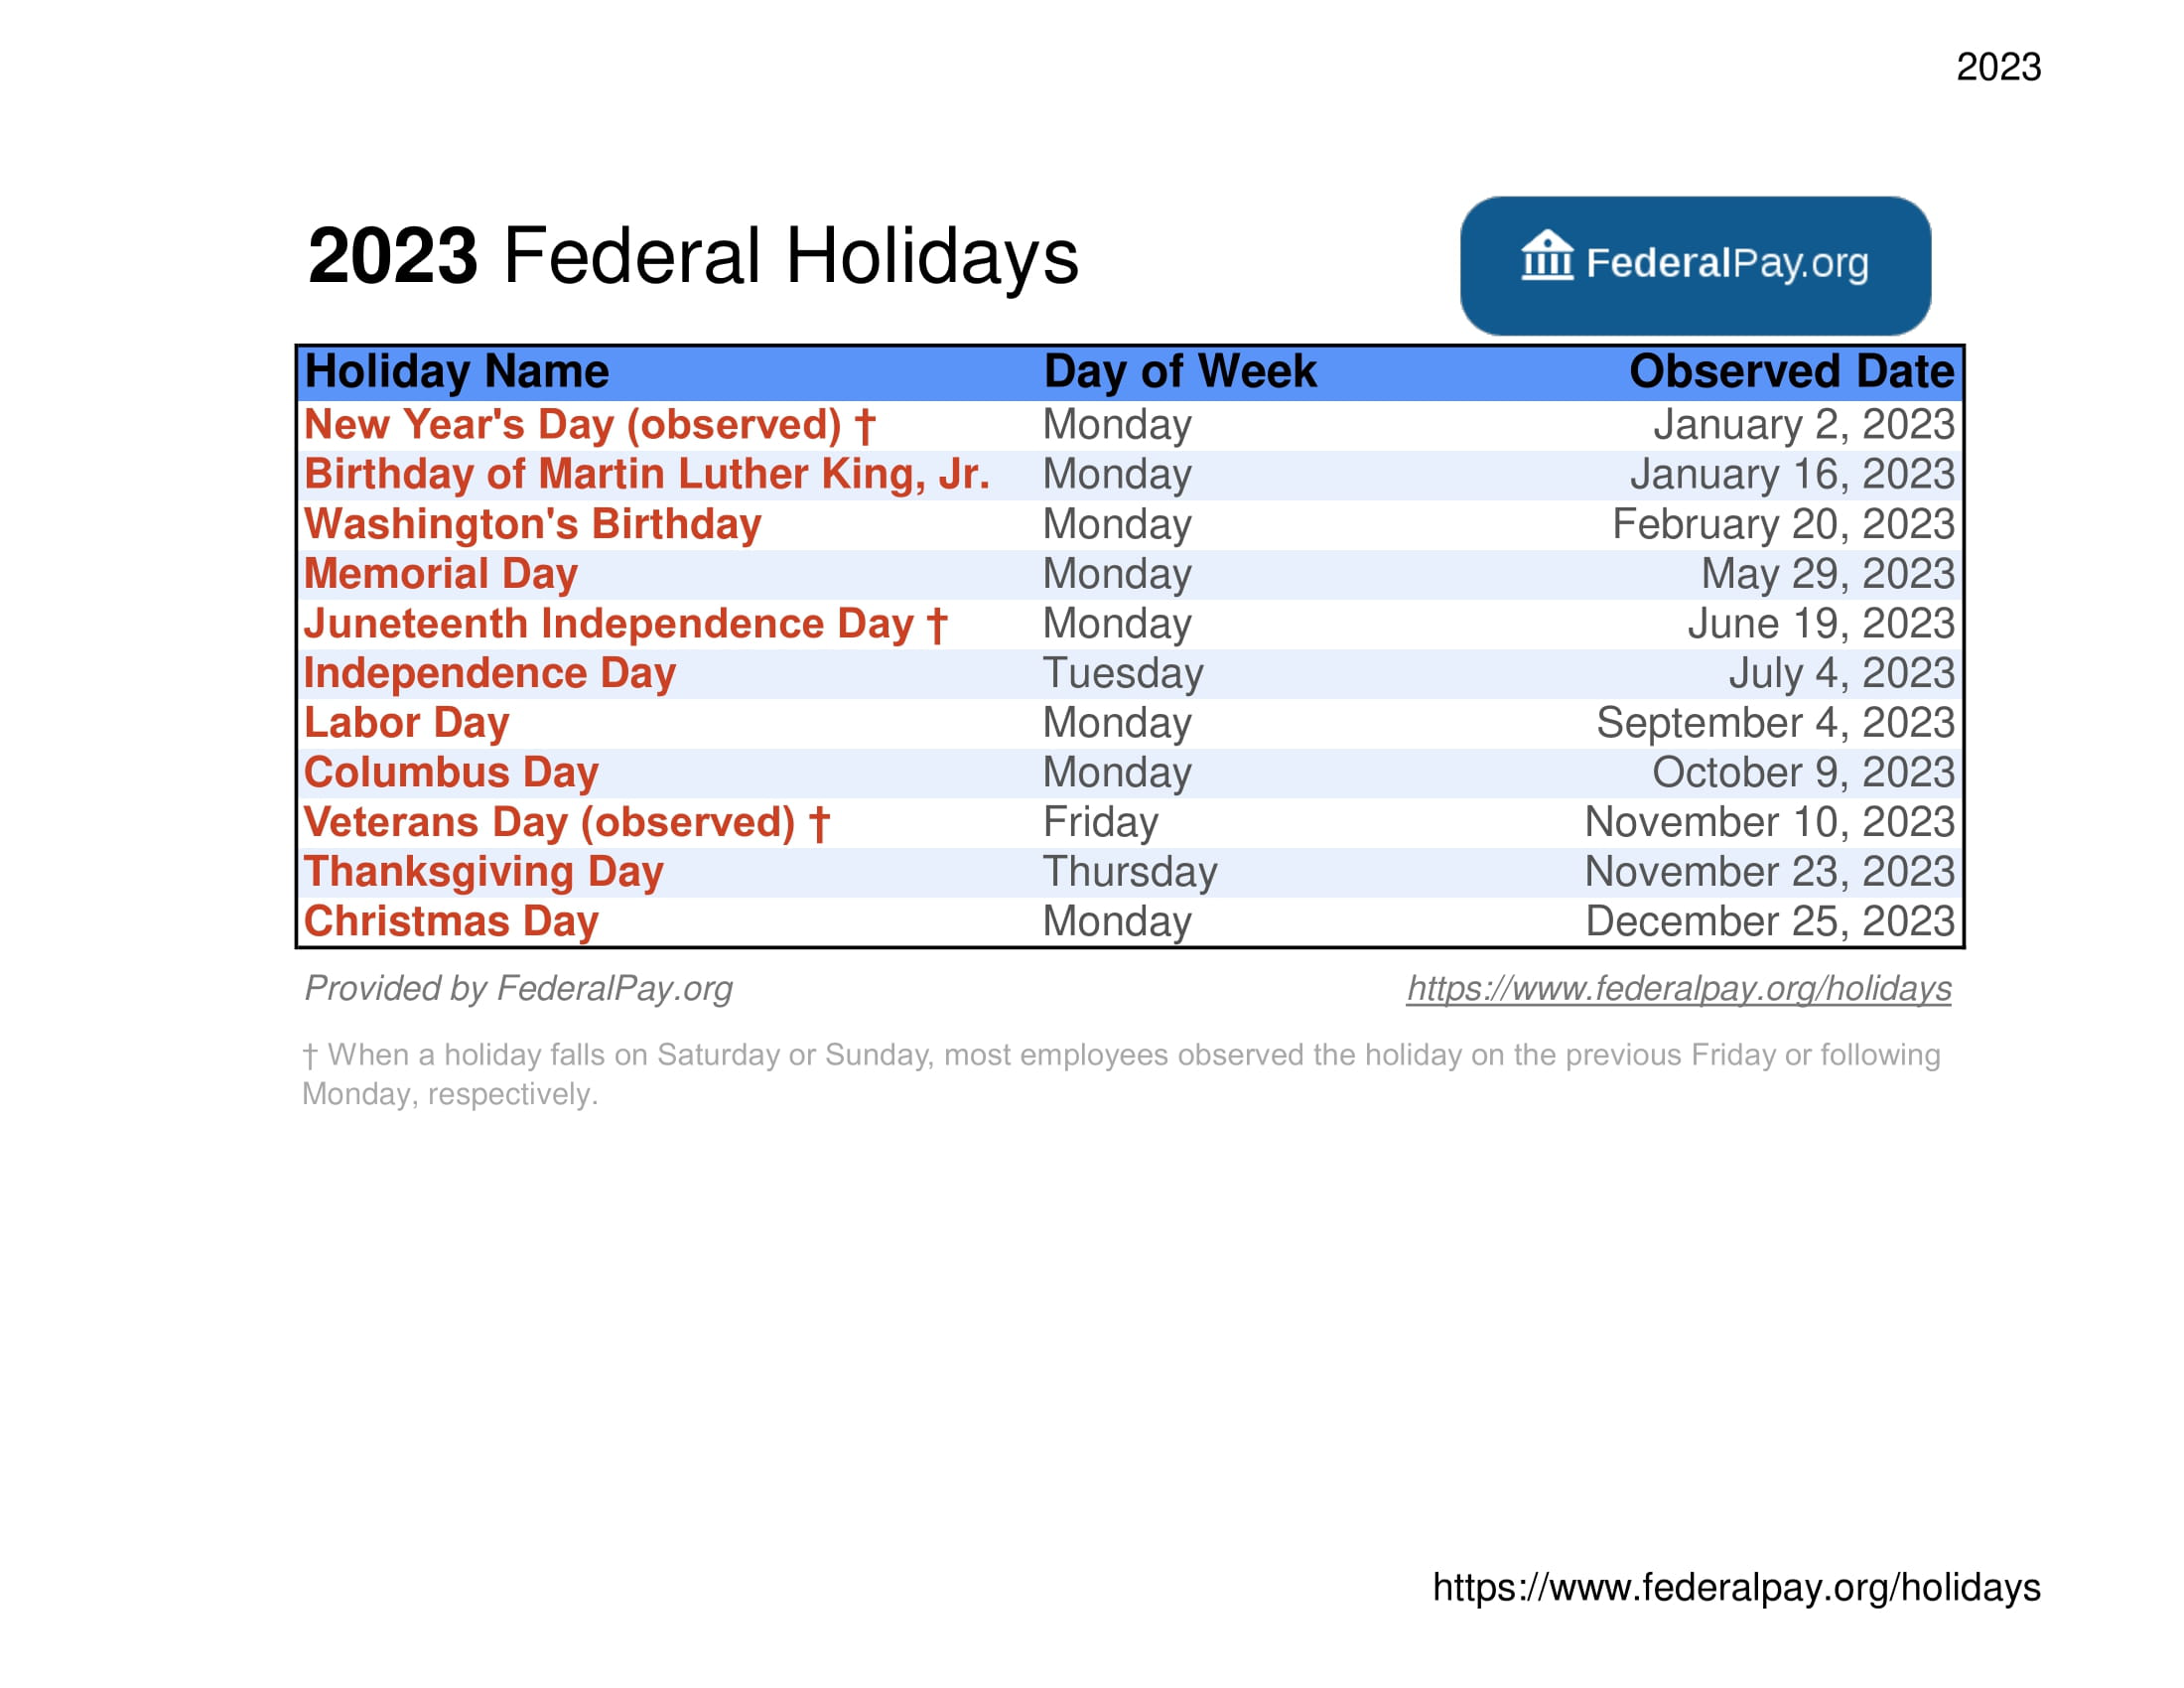 Are Banks Closed on Columbus Day in 2023?